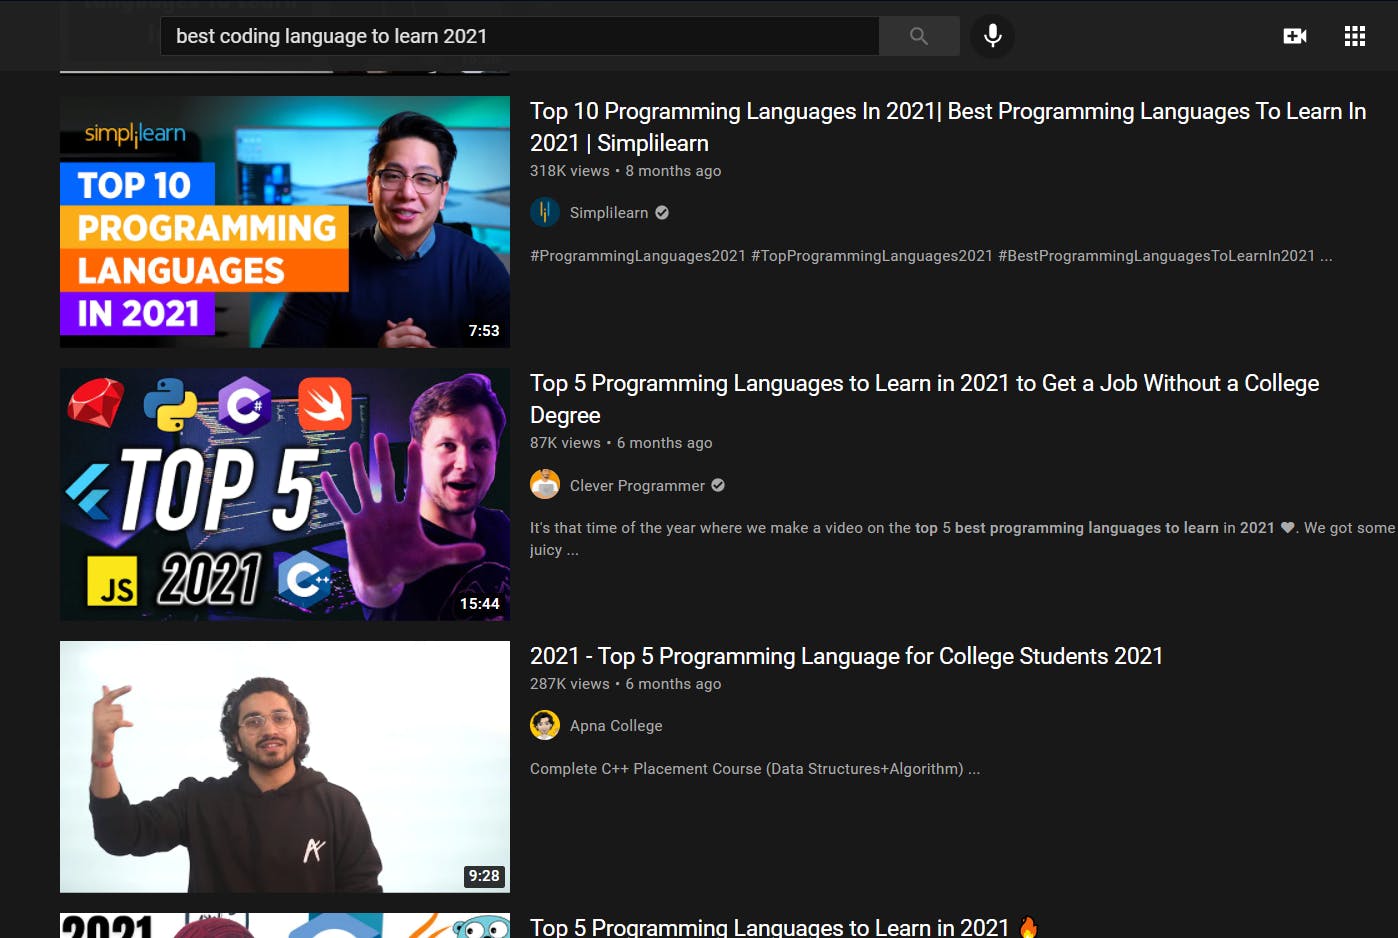 youtube image showing some results